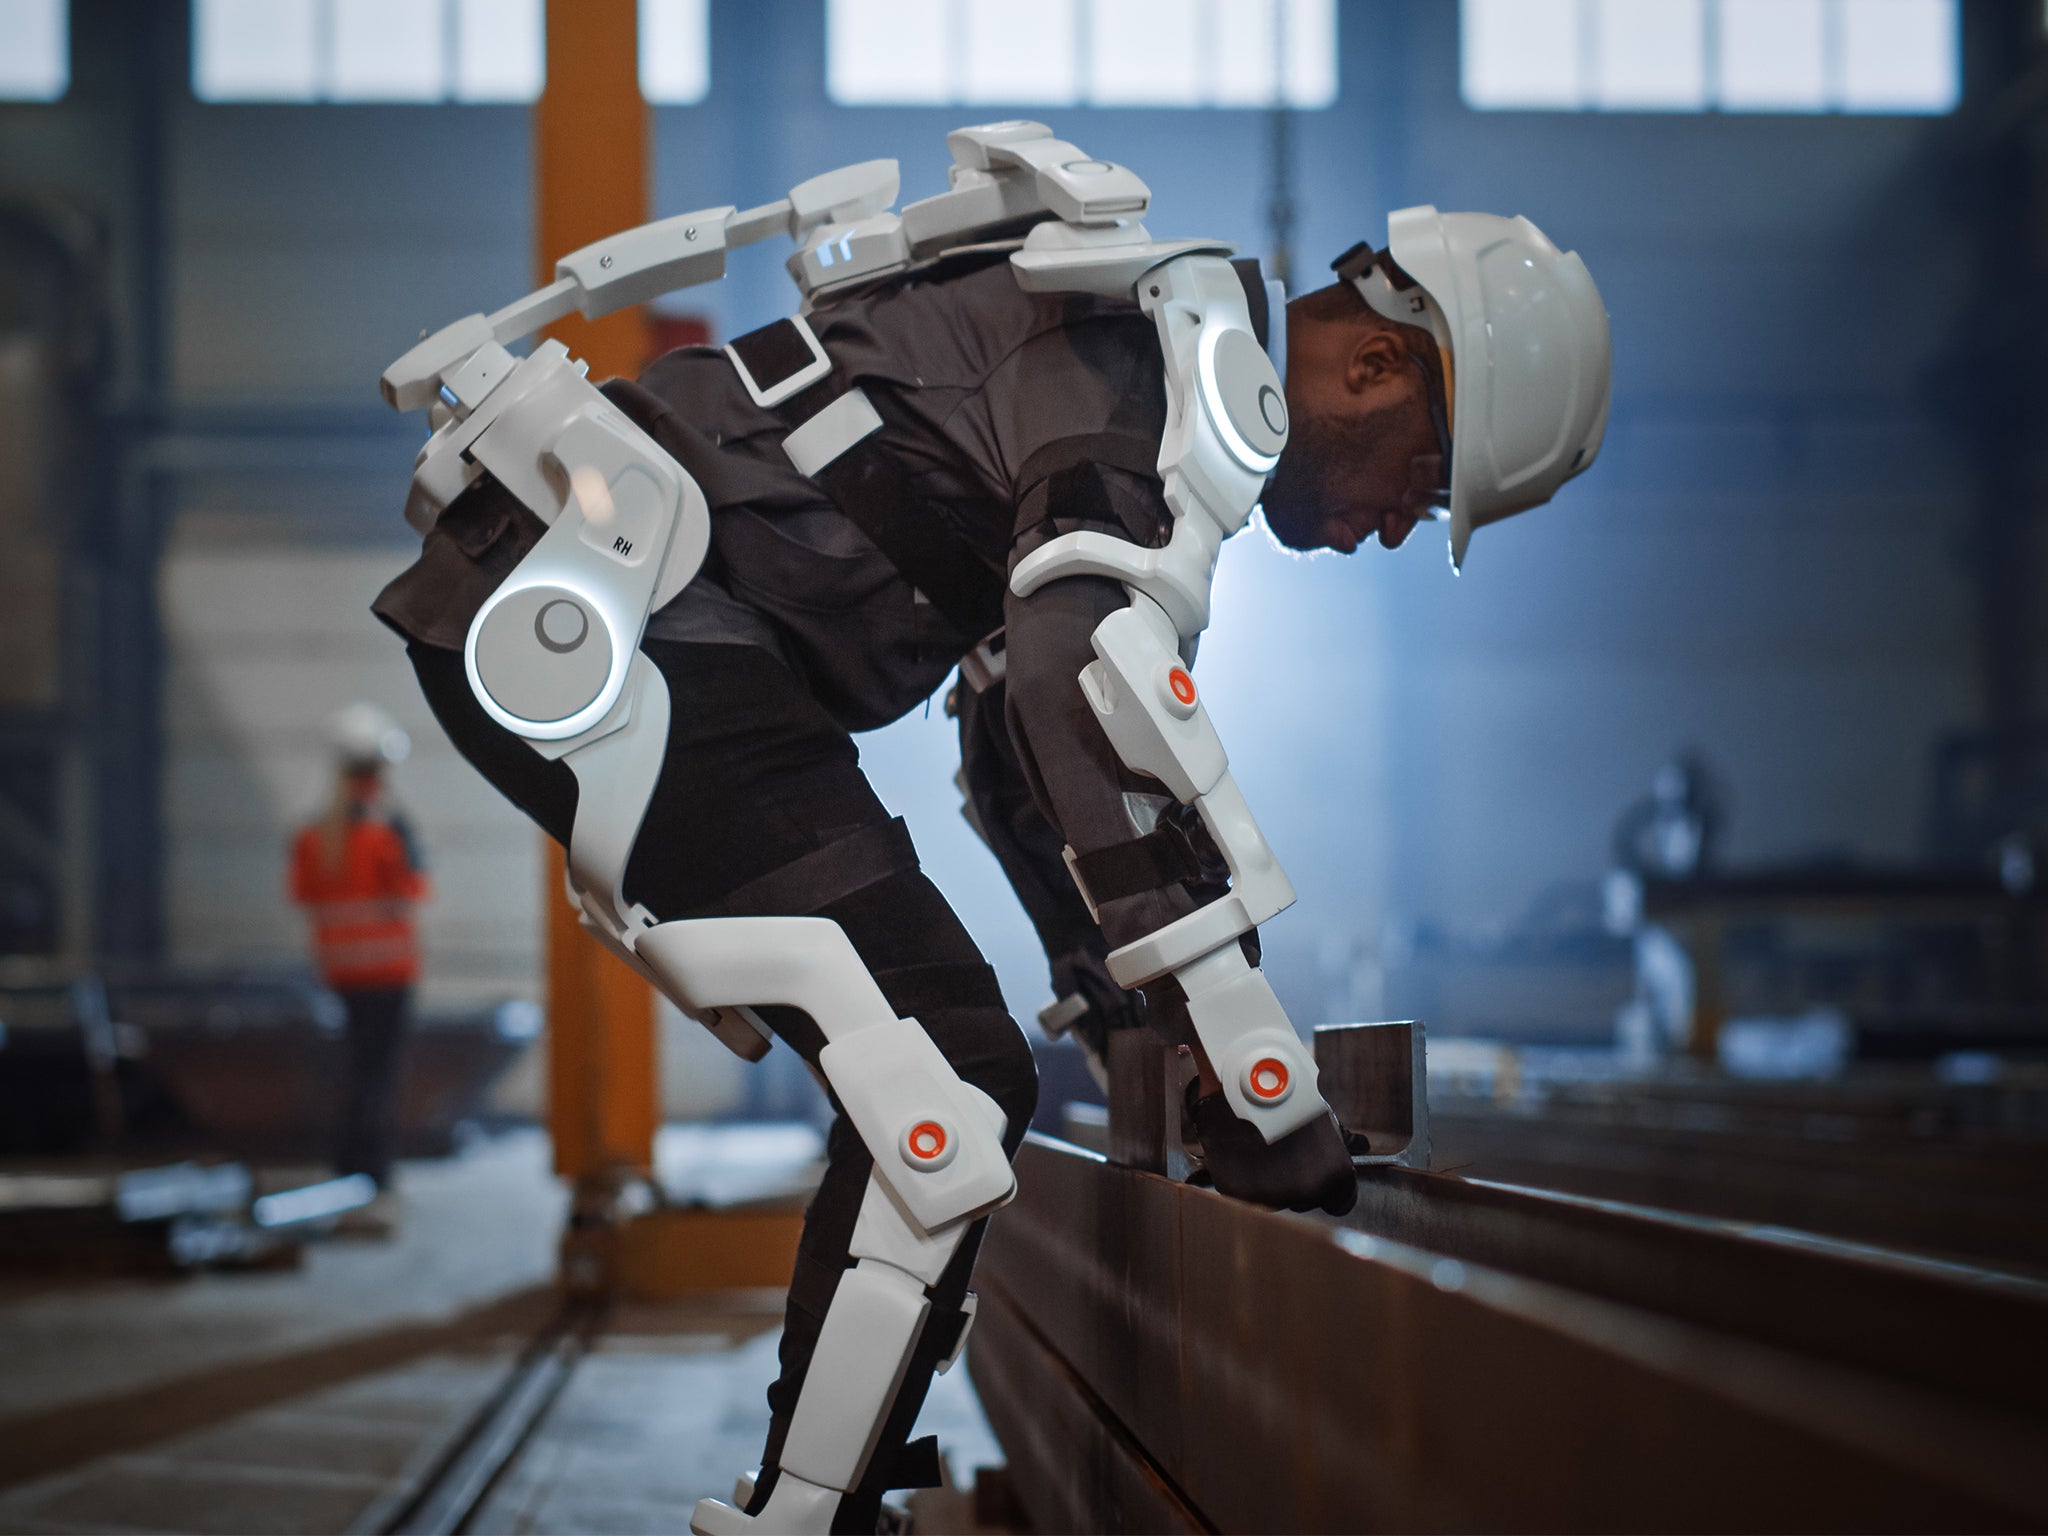 Tougher stuff: some companies want to use exoskeletons to mitigate workplace injury